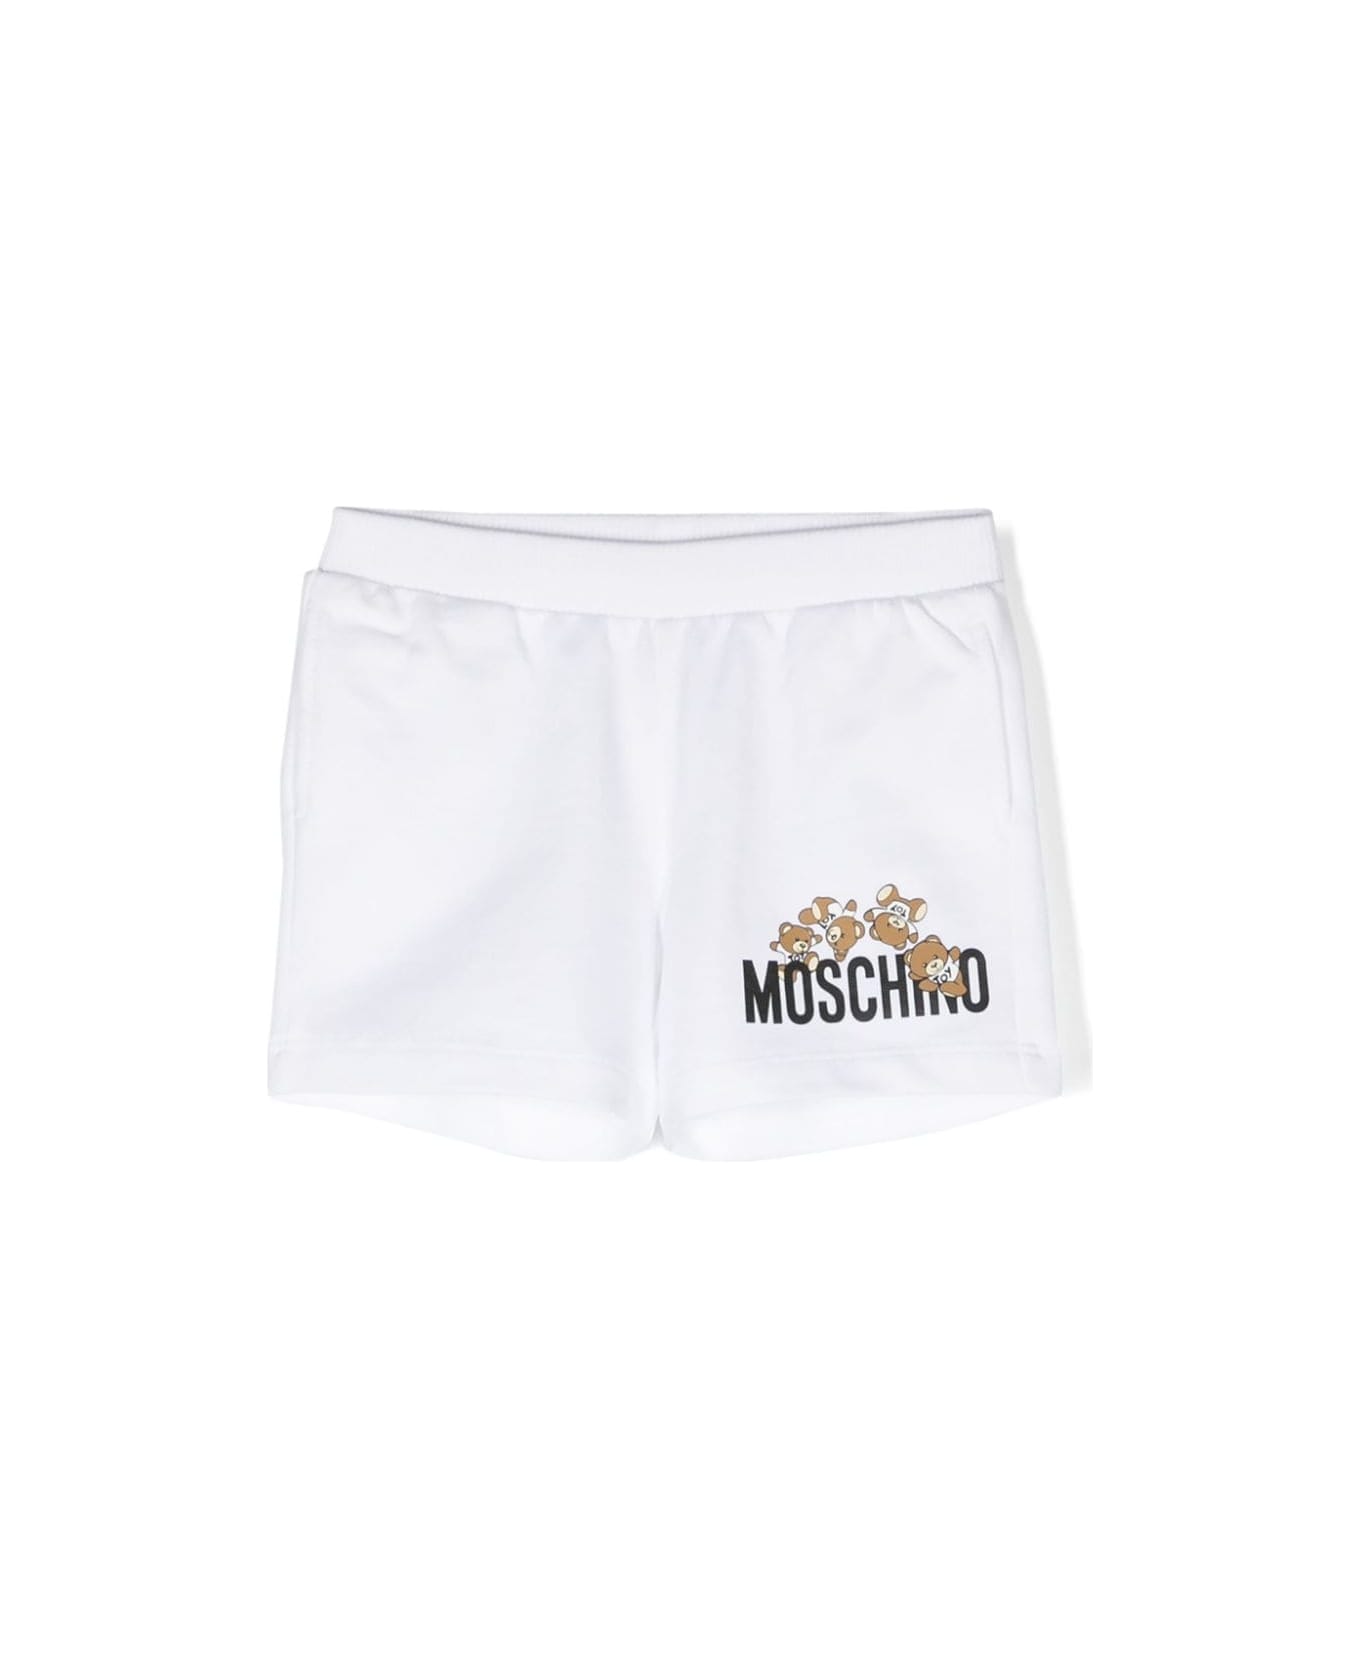 Moschino Shorts Con Stampa Teddy Bear - White ボトムス